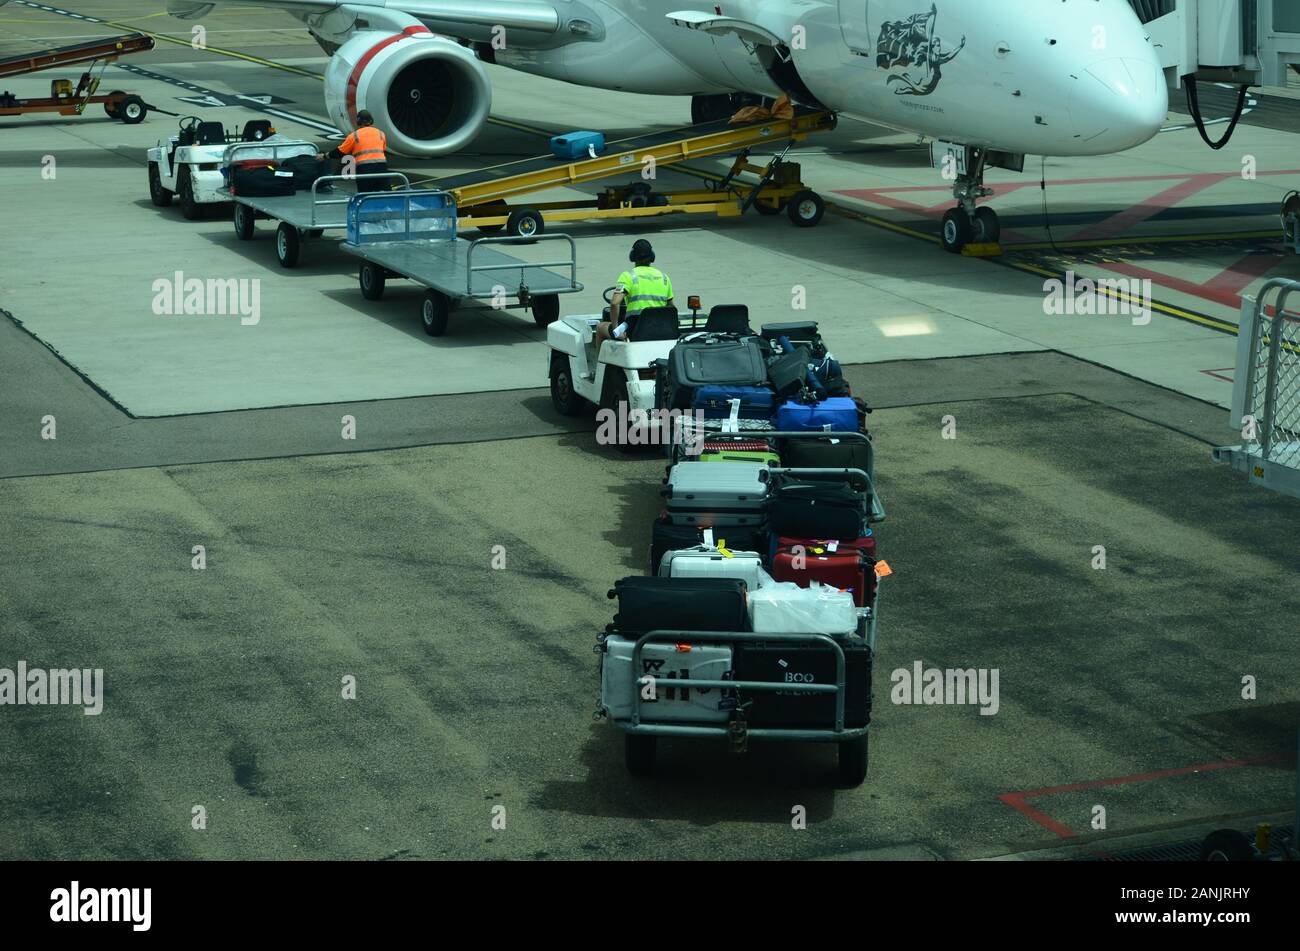 airport baggage handlers loading luggage and cargo onto passenger jet Stock Photo